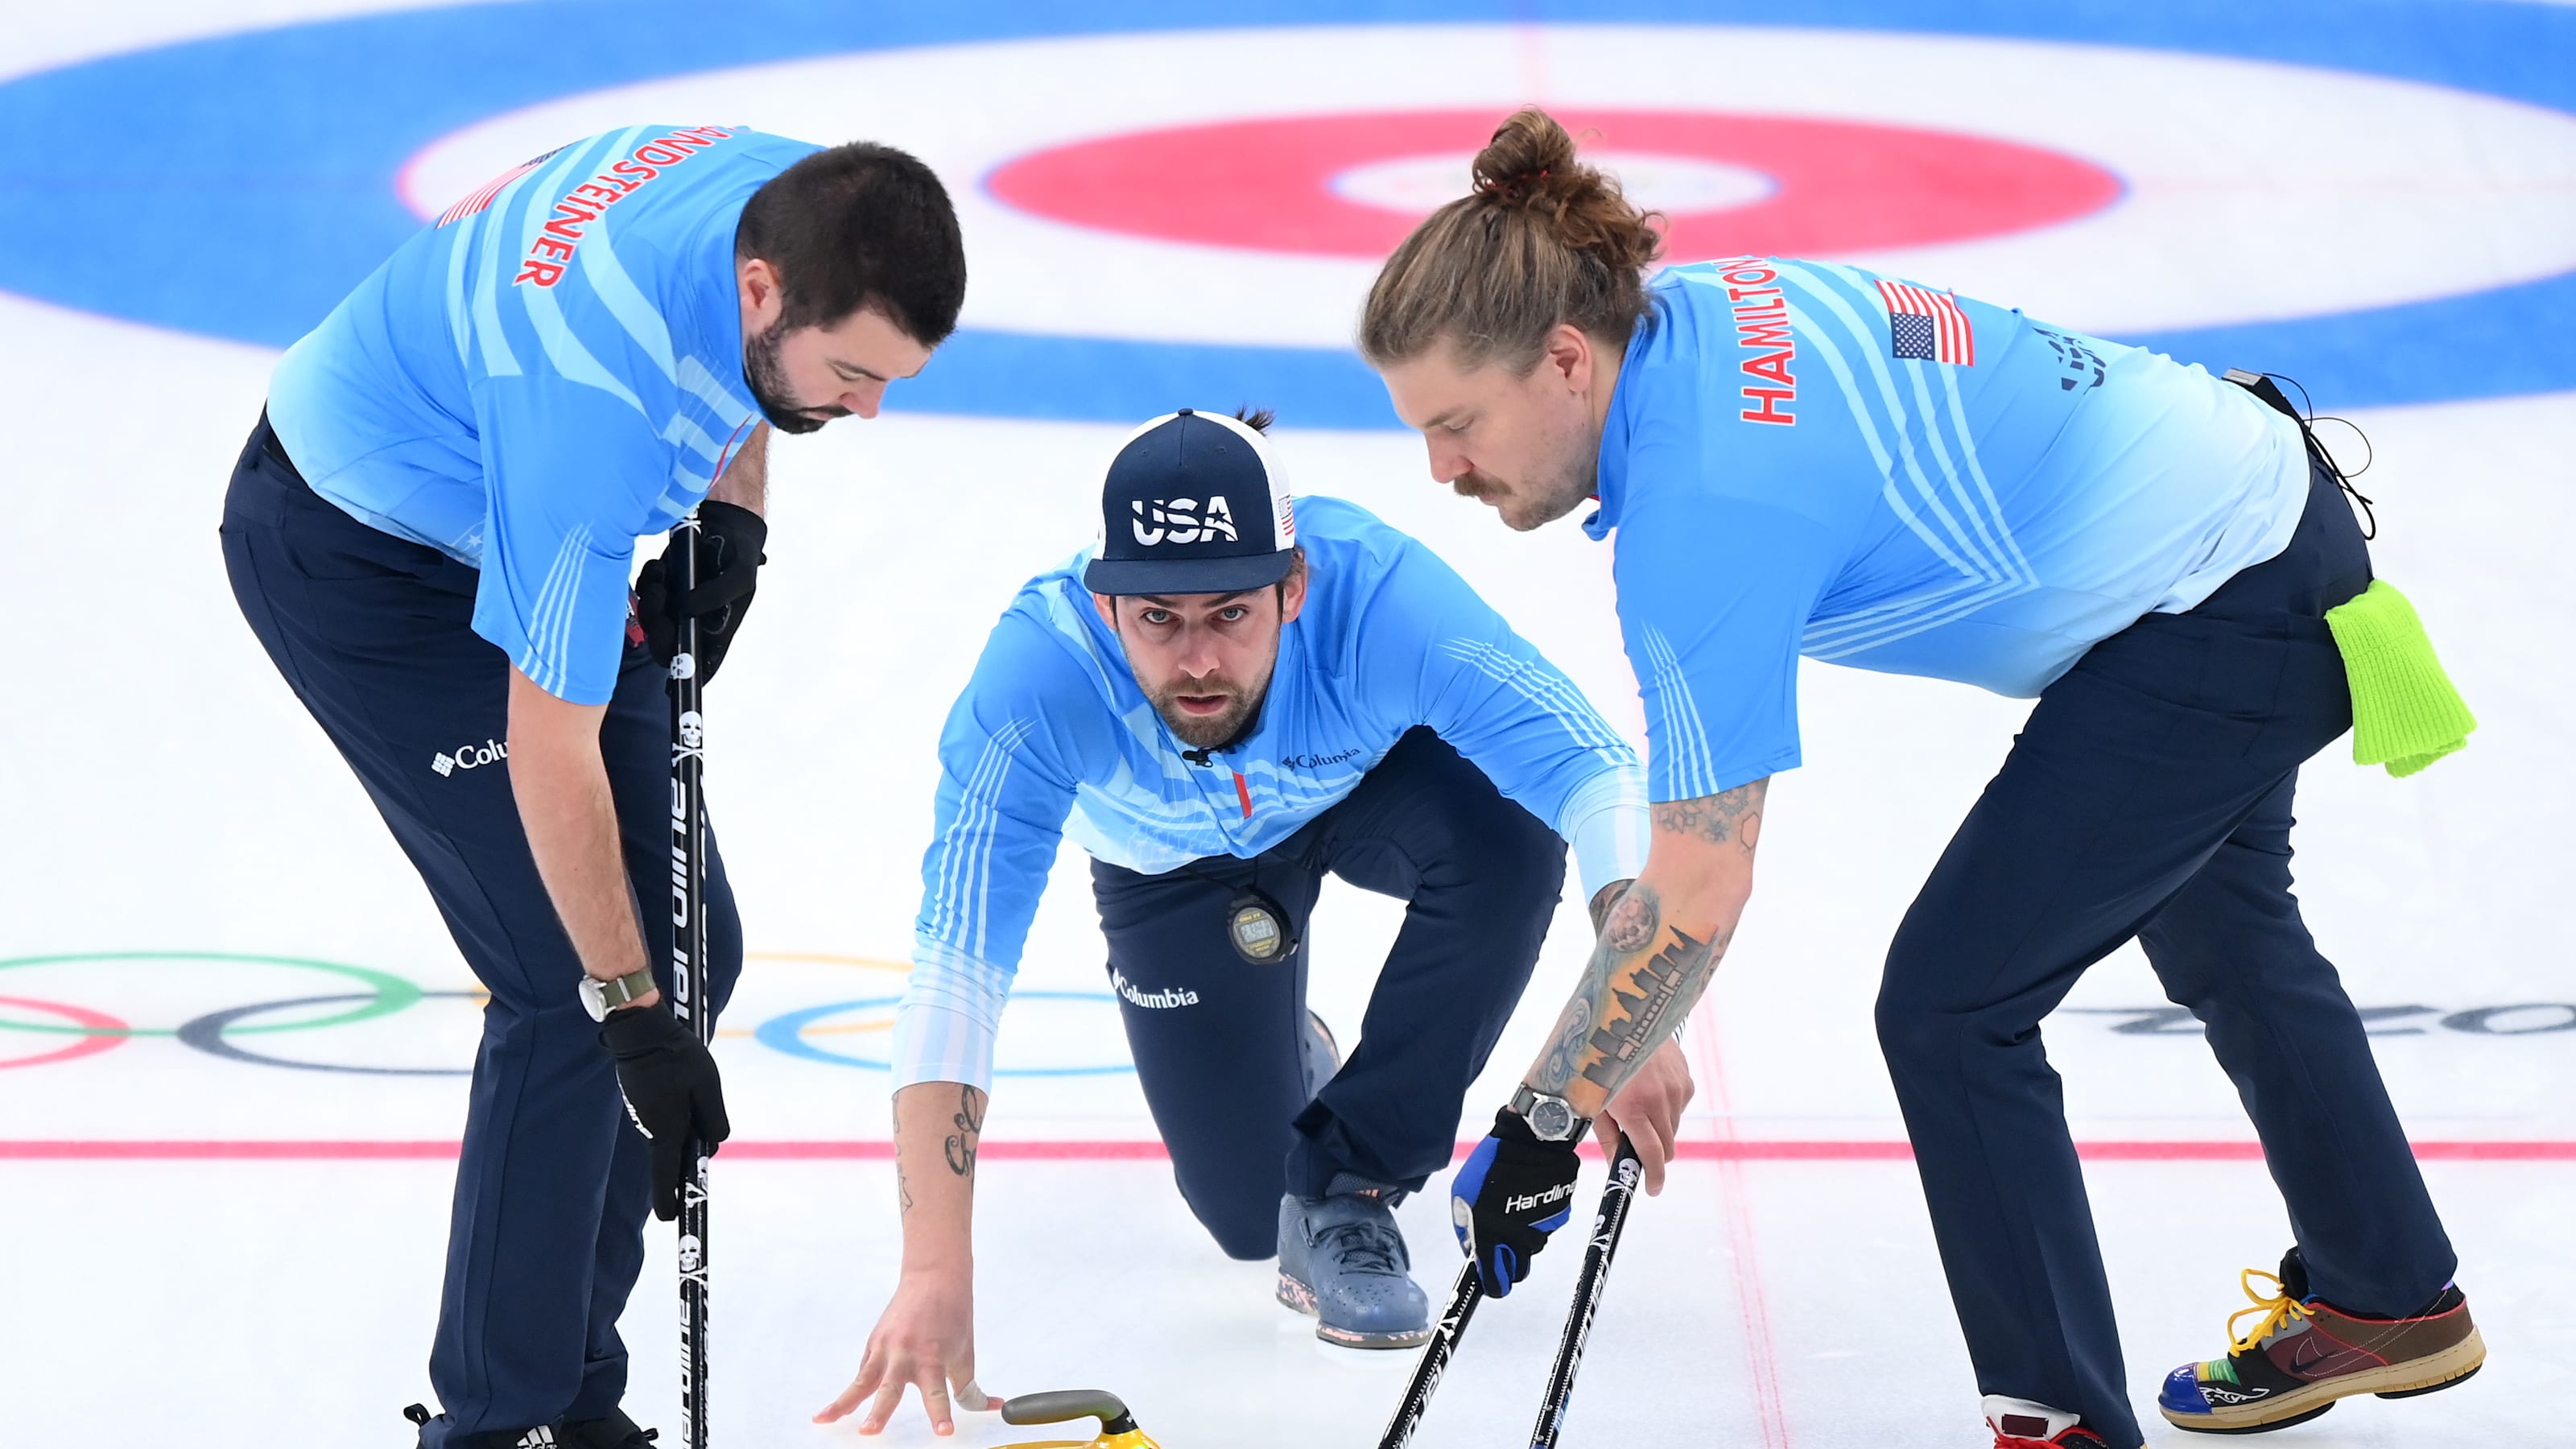 Beijing 22 Men S Curling The Rejects Aiming To Win Bronze For Team Usa